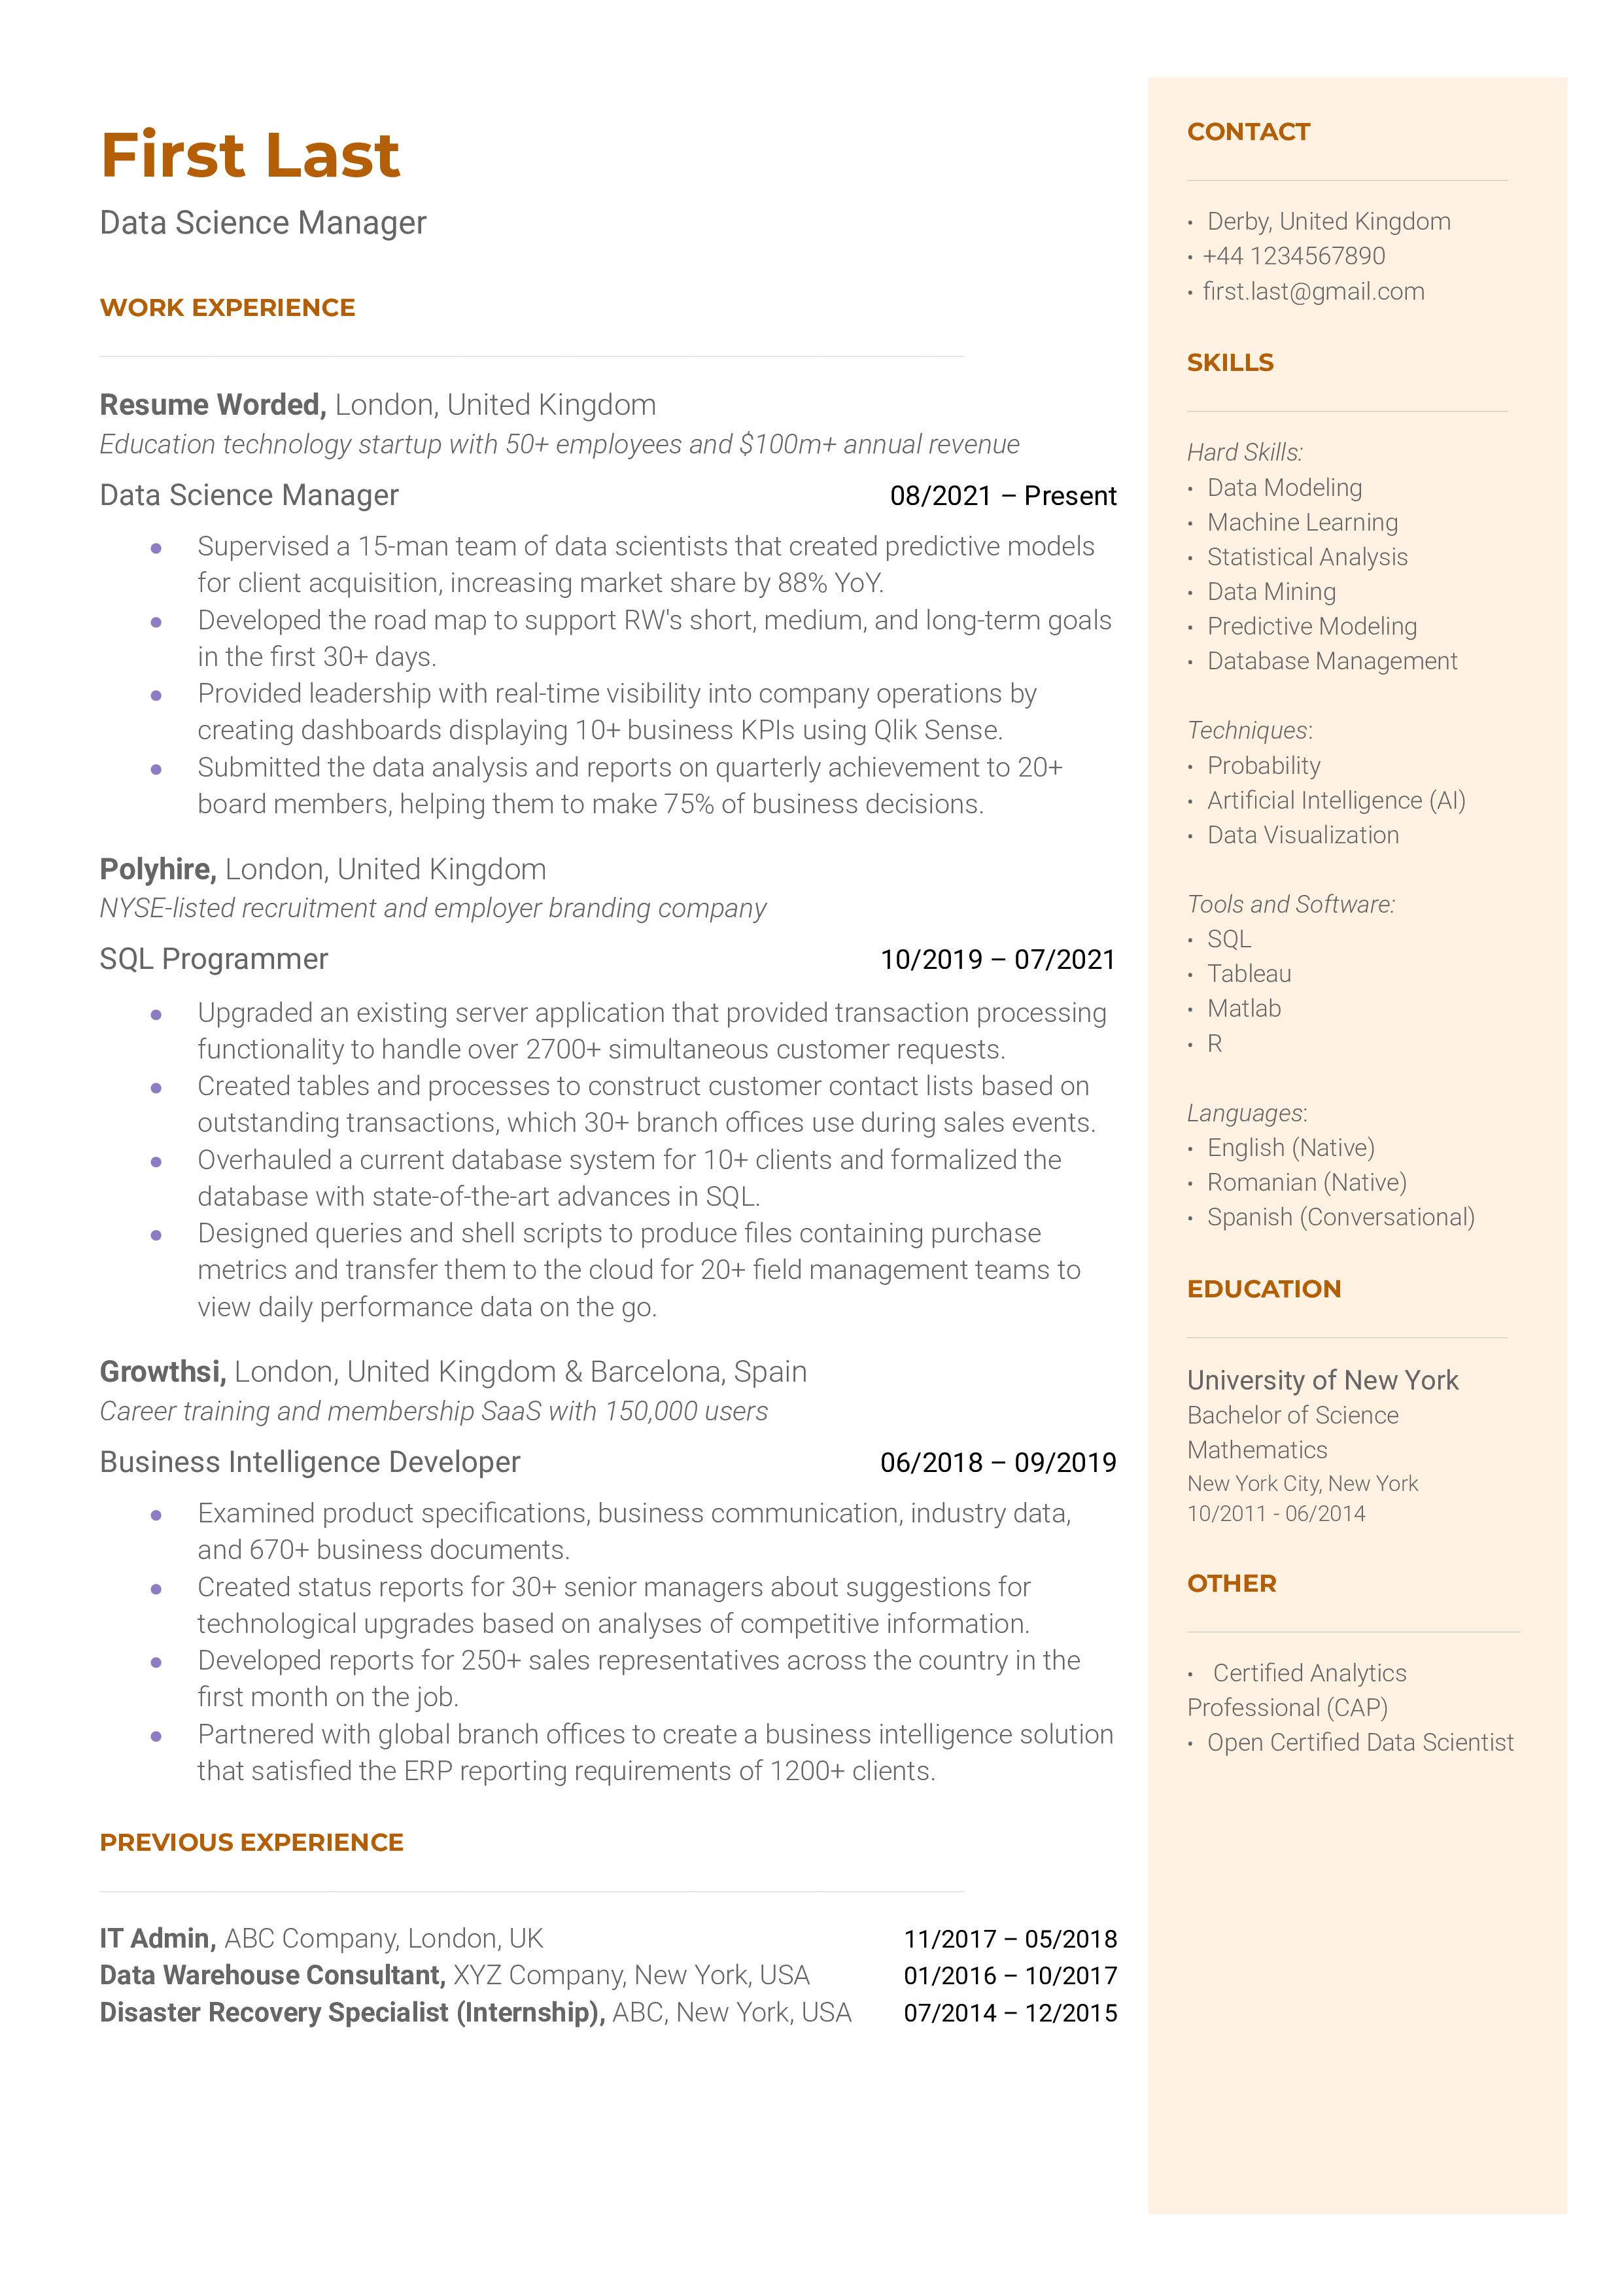 A data science manager resume template highlighting leadership experience.